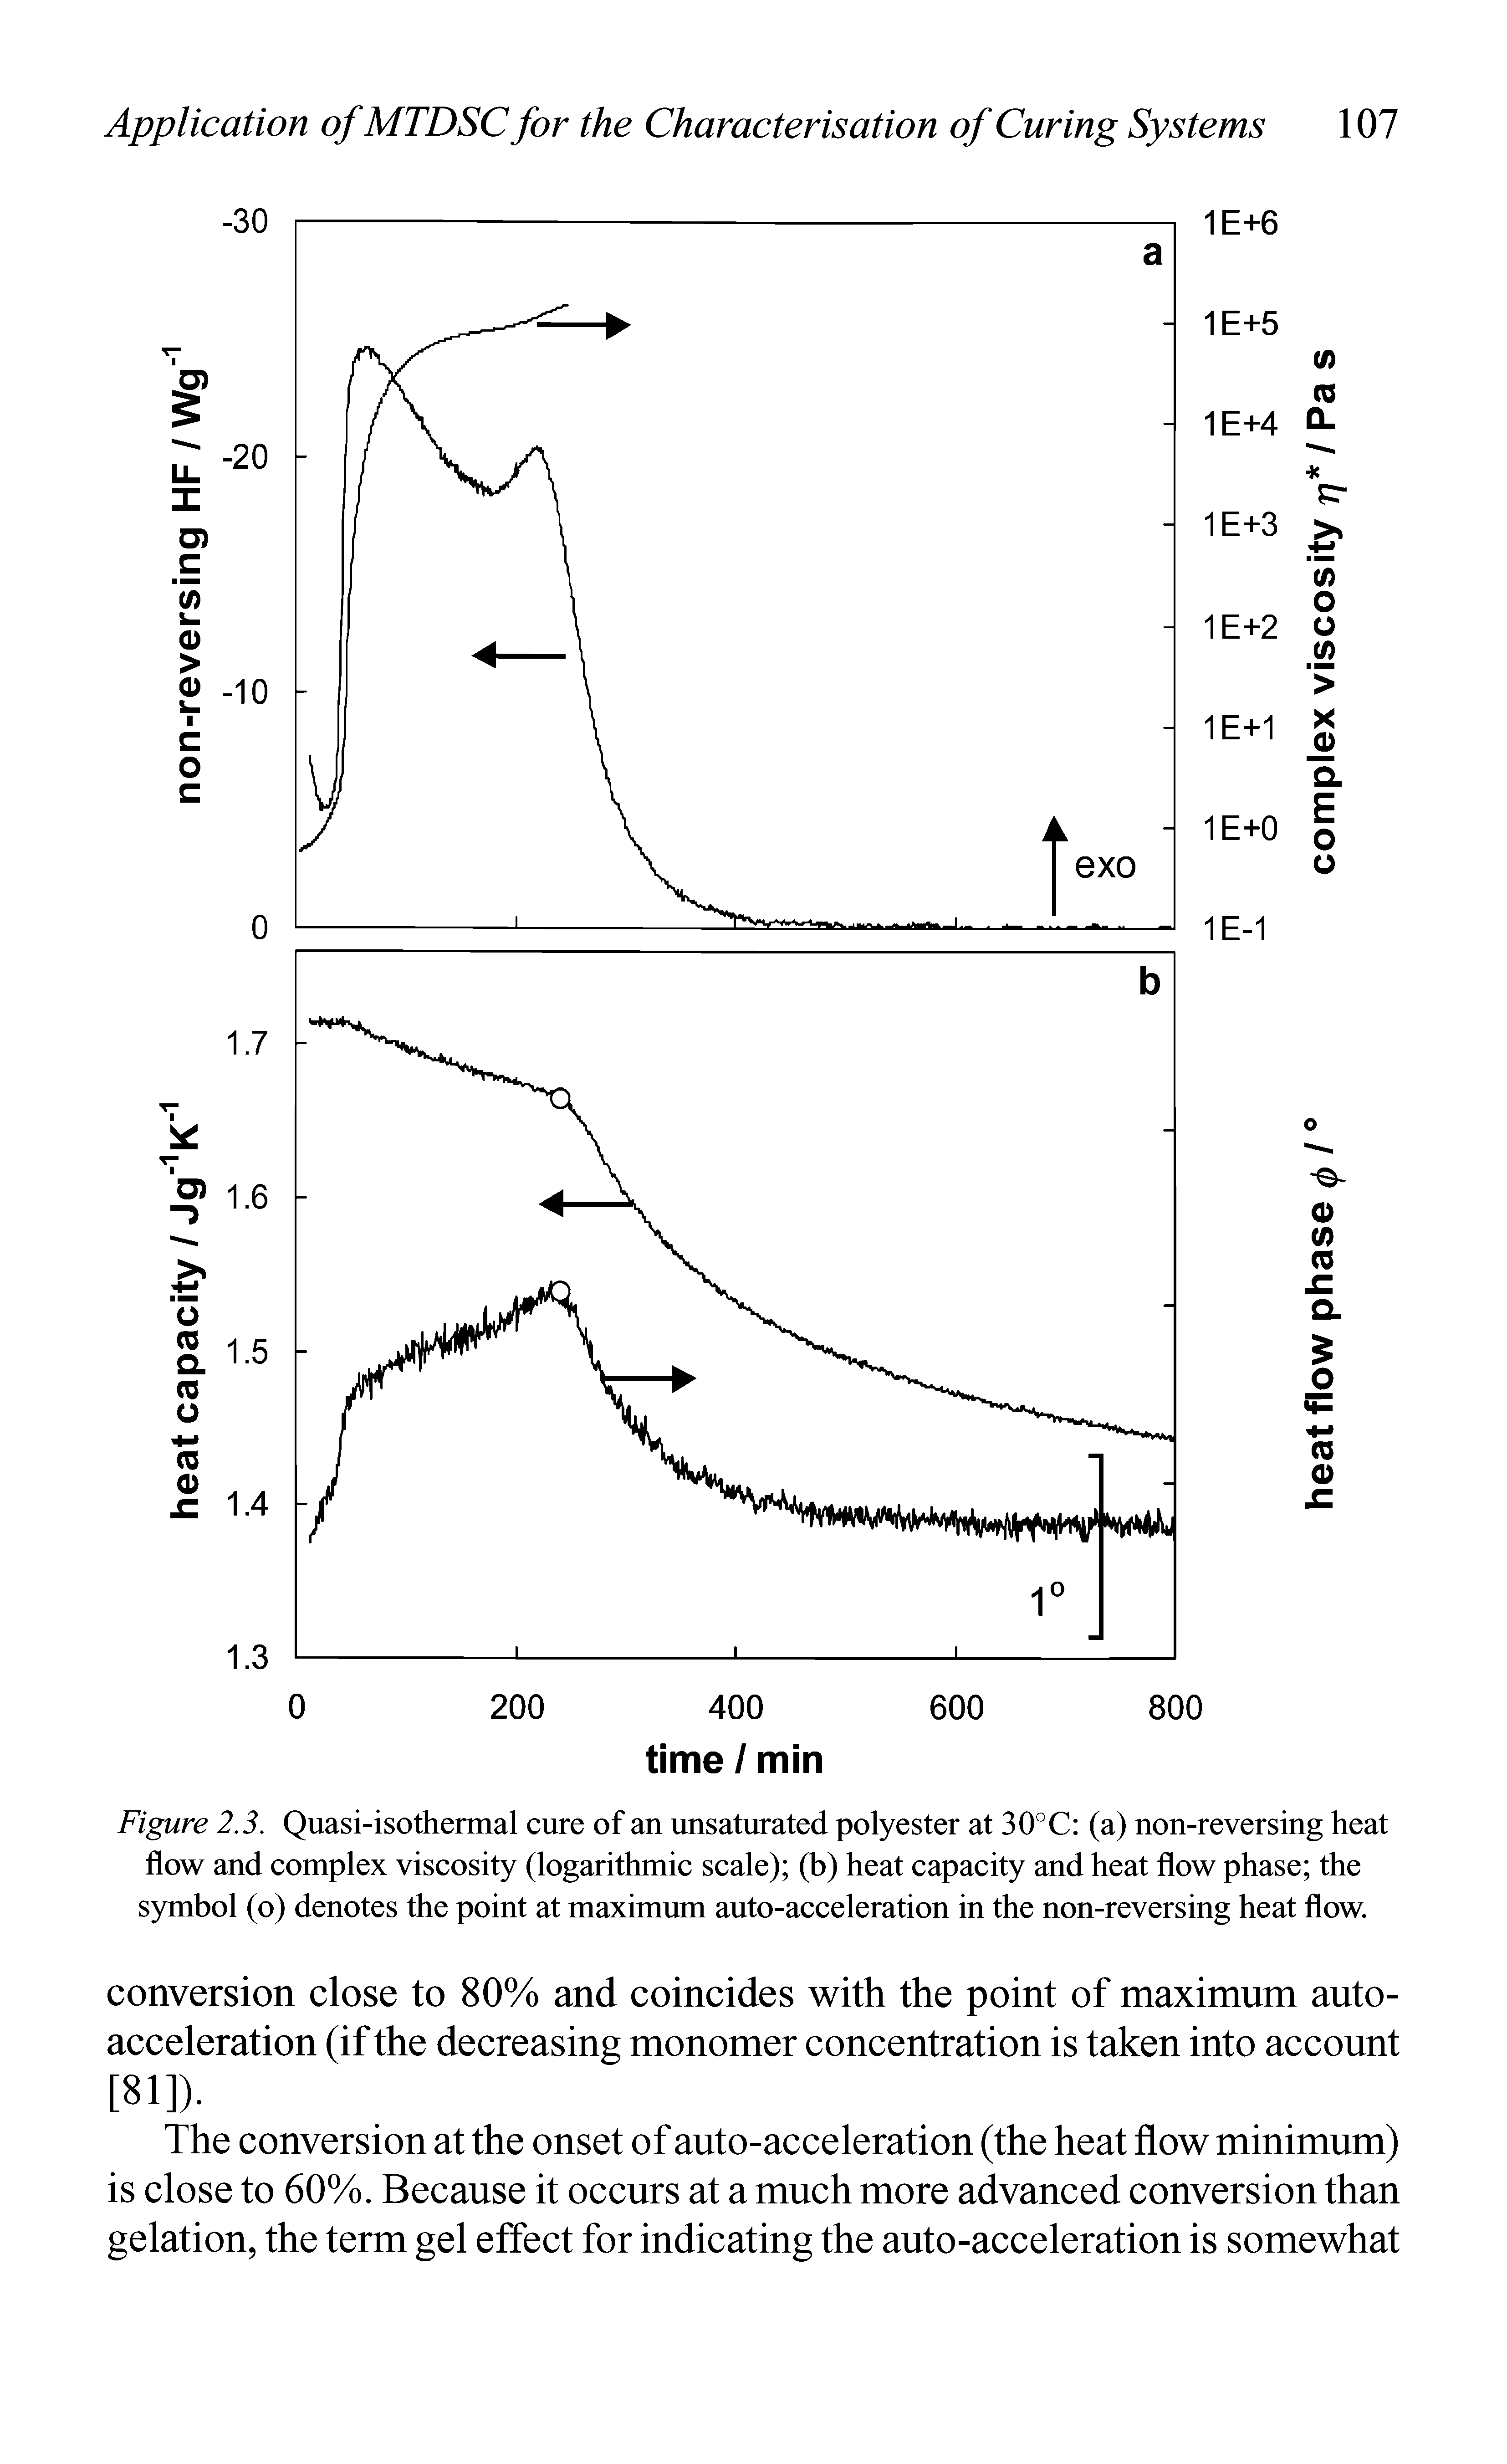 Figure 2.3. Quasi-isothermal cure of an unsaturated polyester at 30°C (a) non-reversing heat flow and complex viseosity (logarithmie seale) (b) heat capacity and heat flow phase the symbol (o) denotes the point at maximum auto-aeeeleration in the non-reversing heat flow...